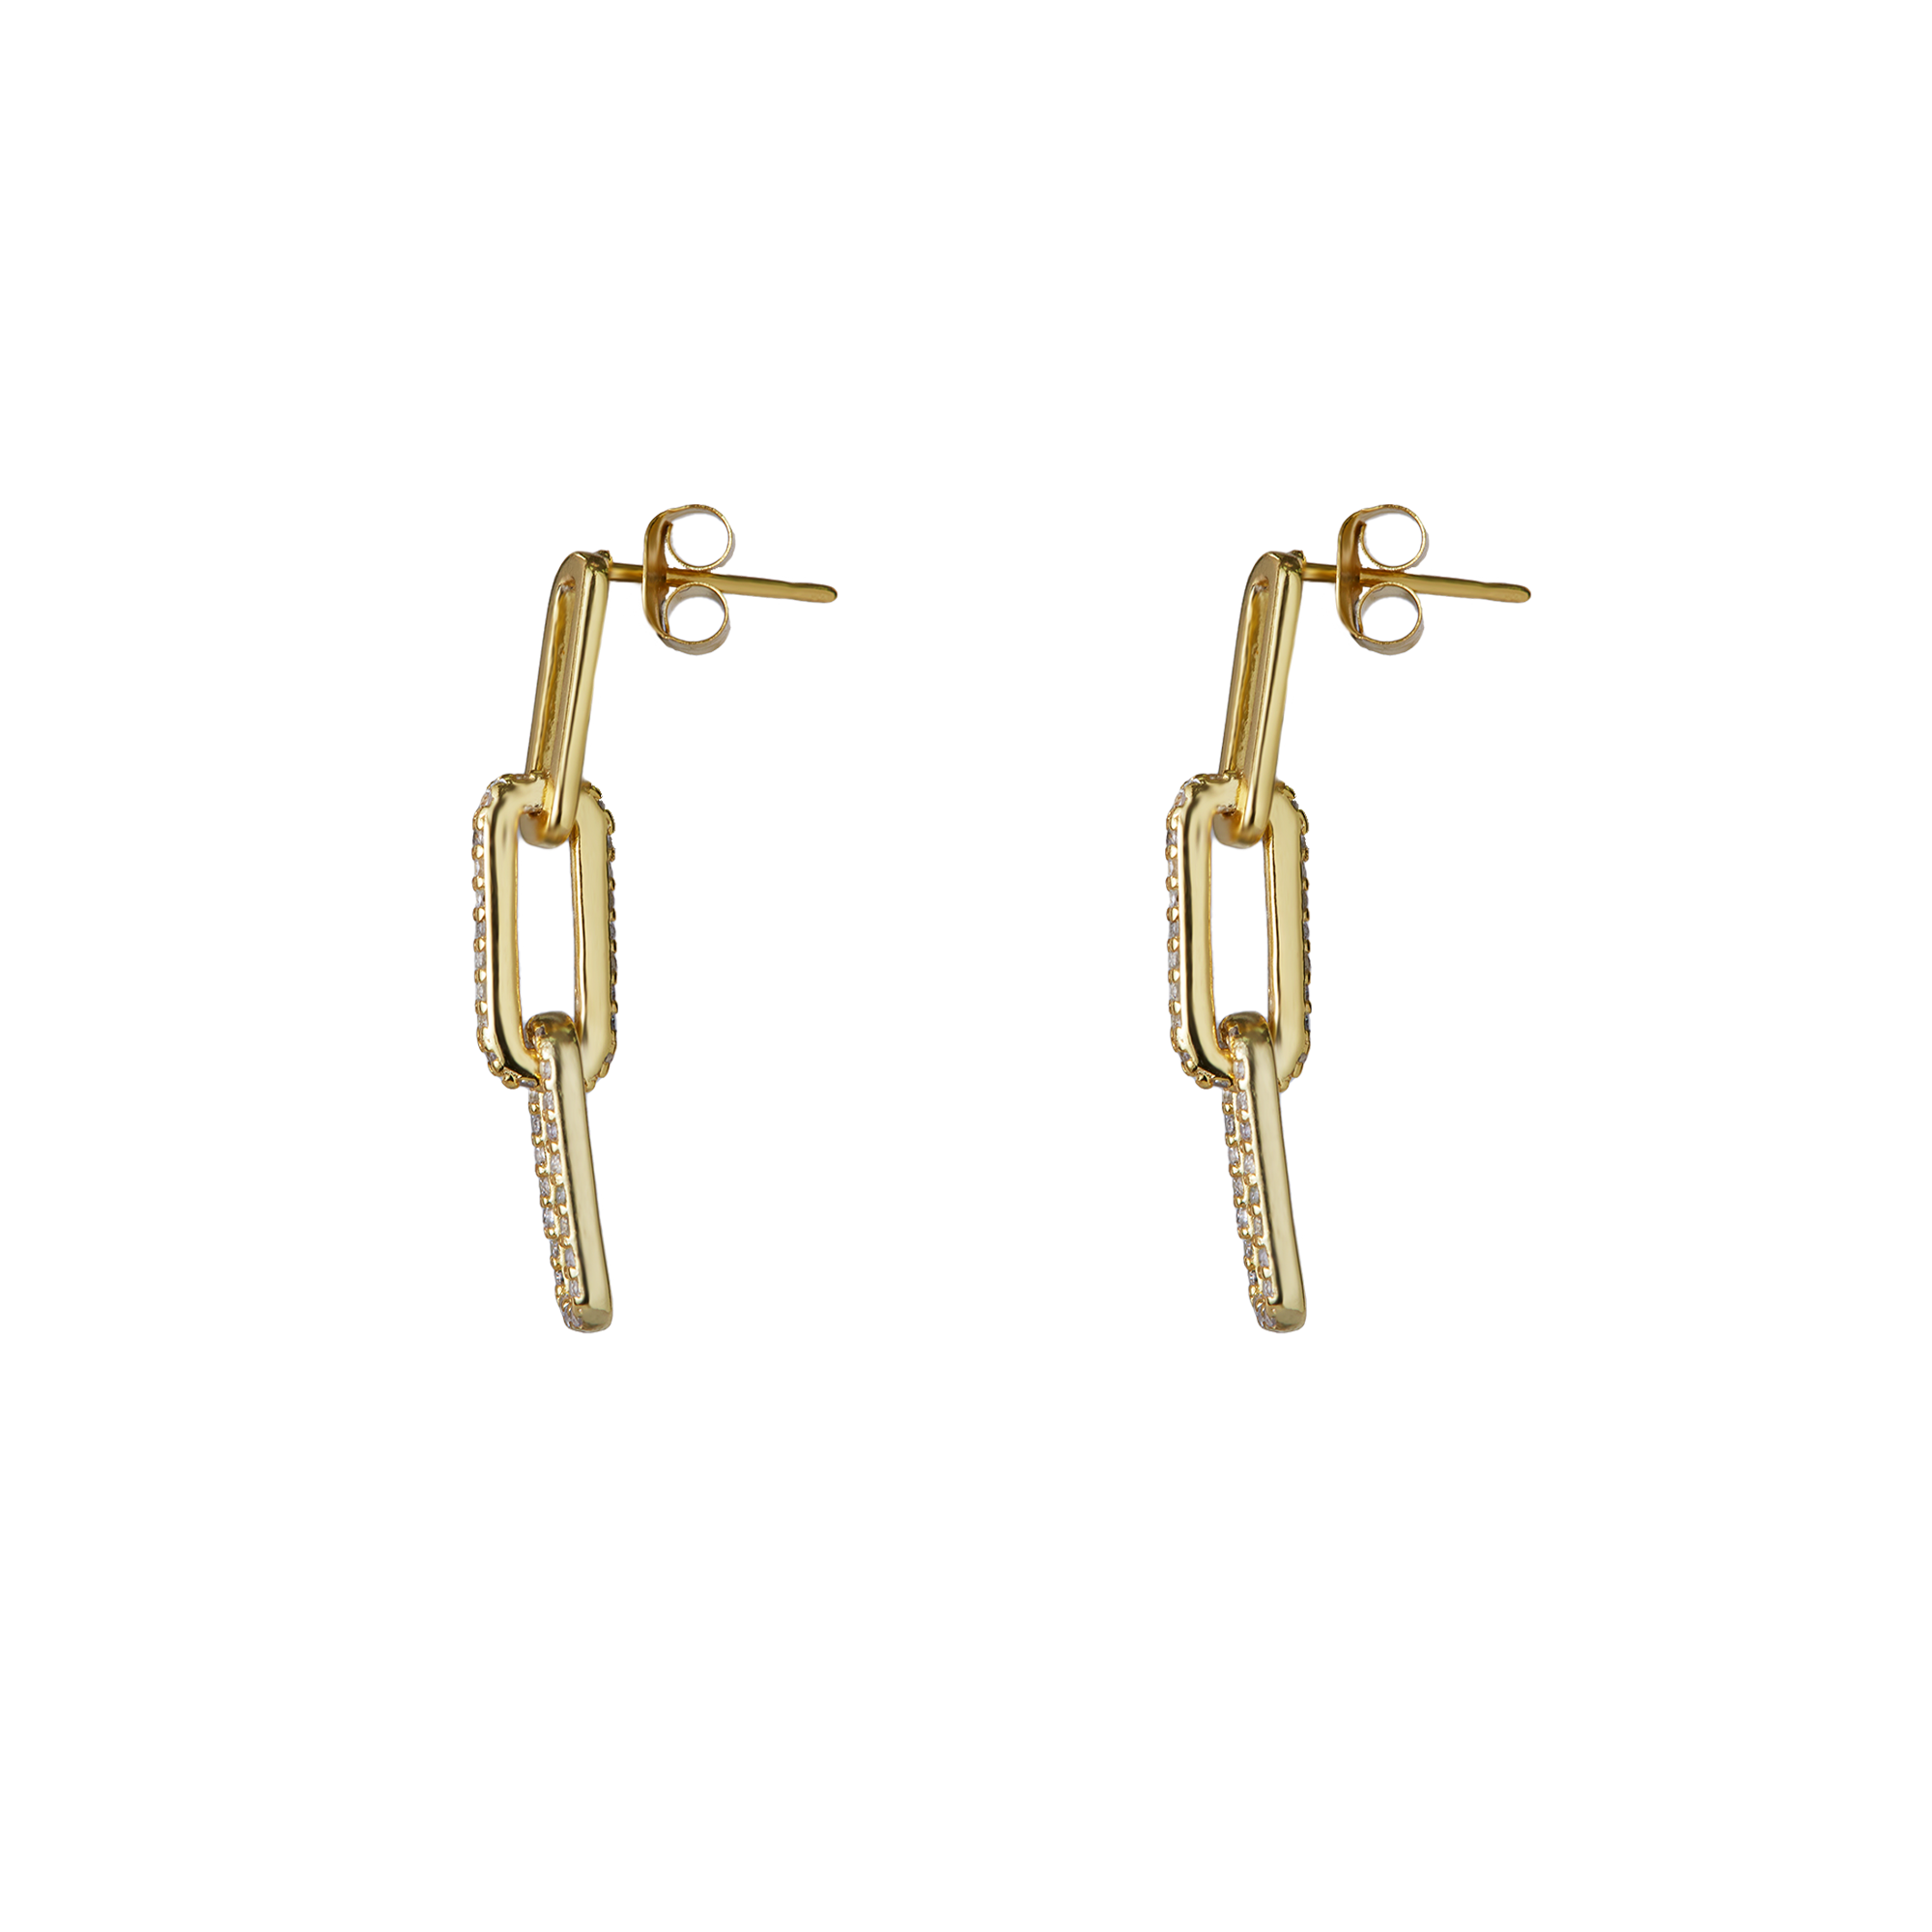 THE PAVE PAPERCLIP EARRING